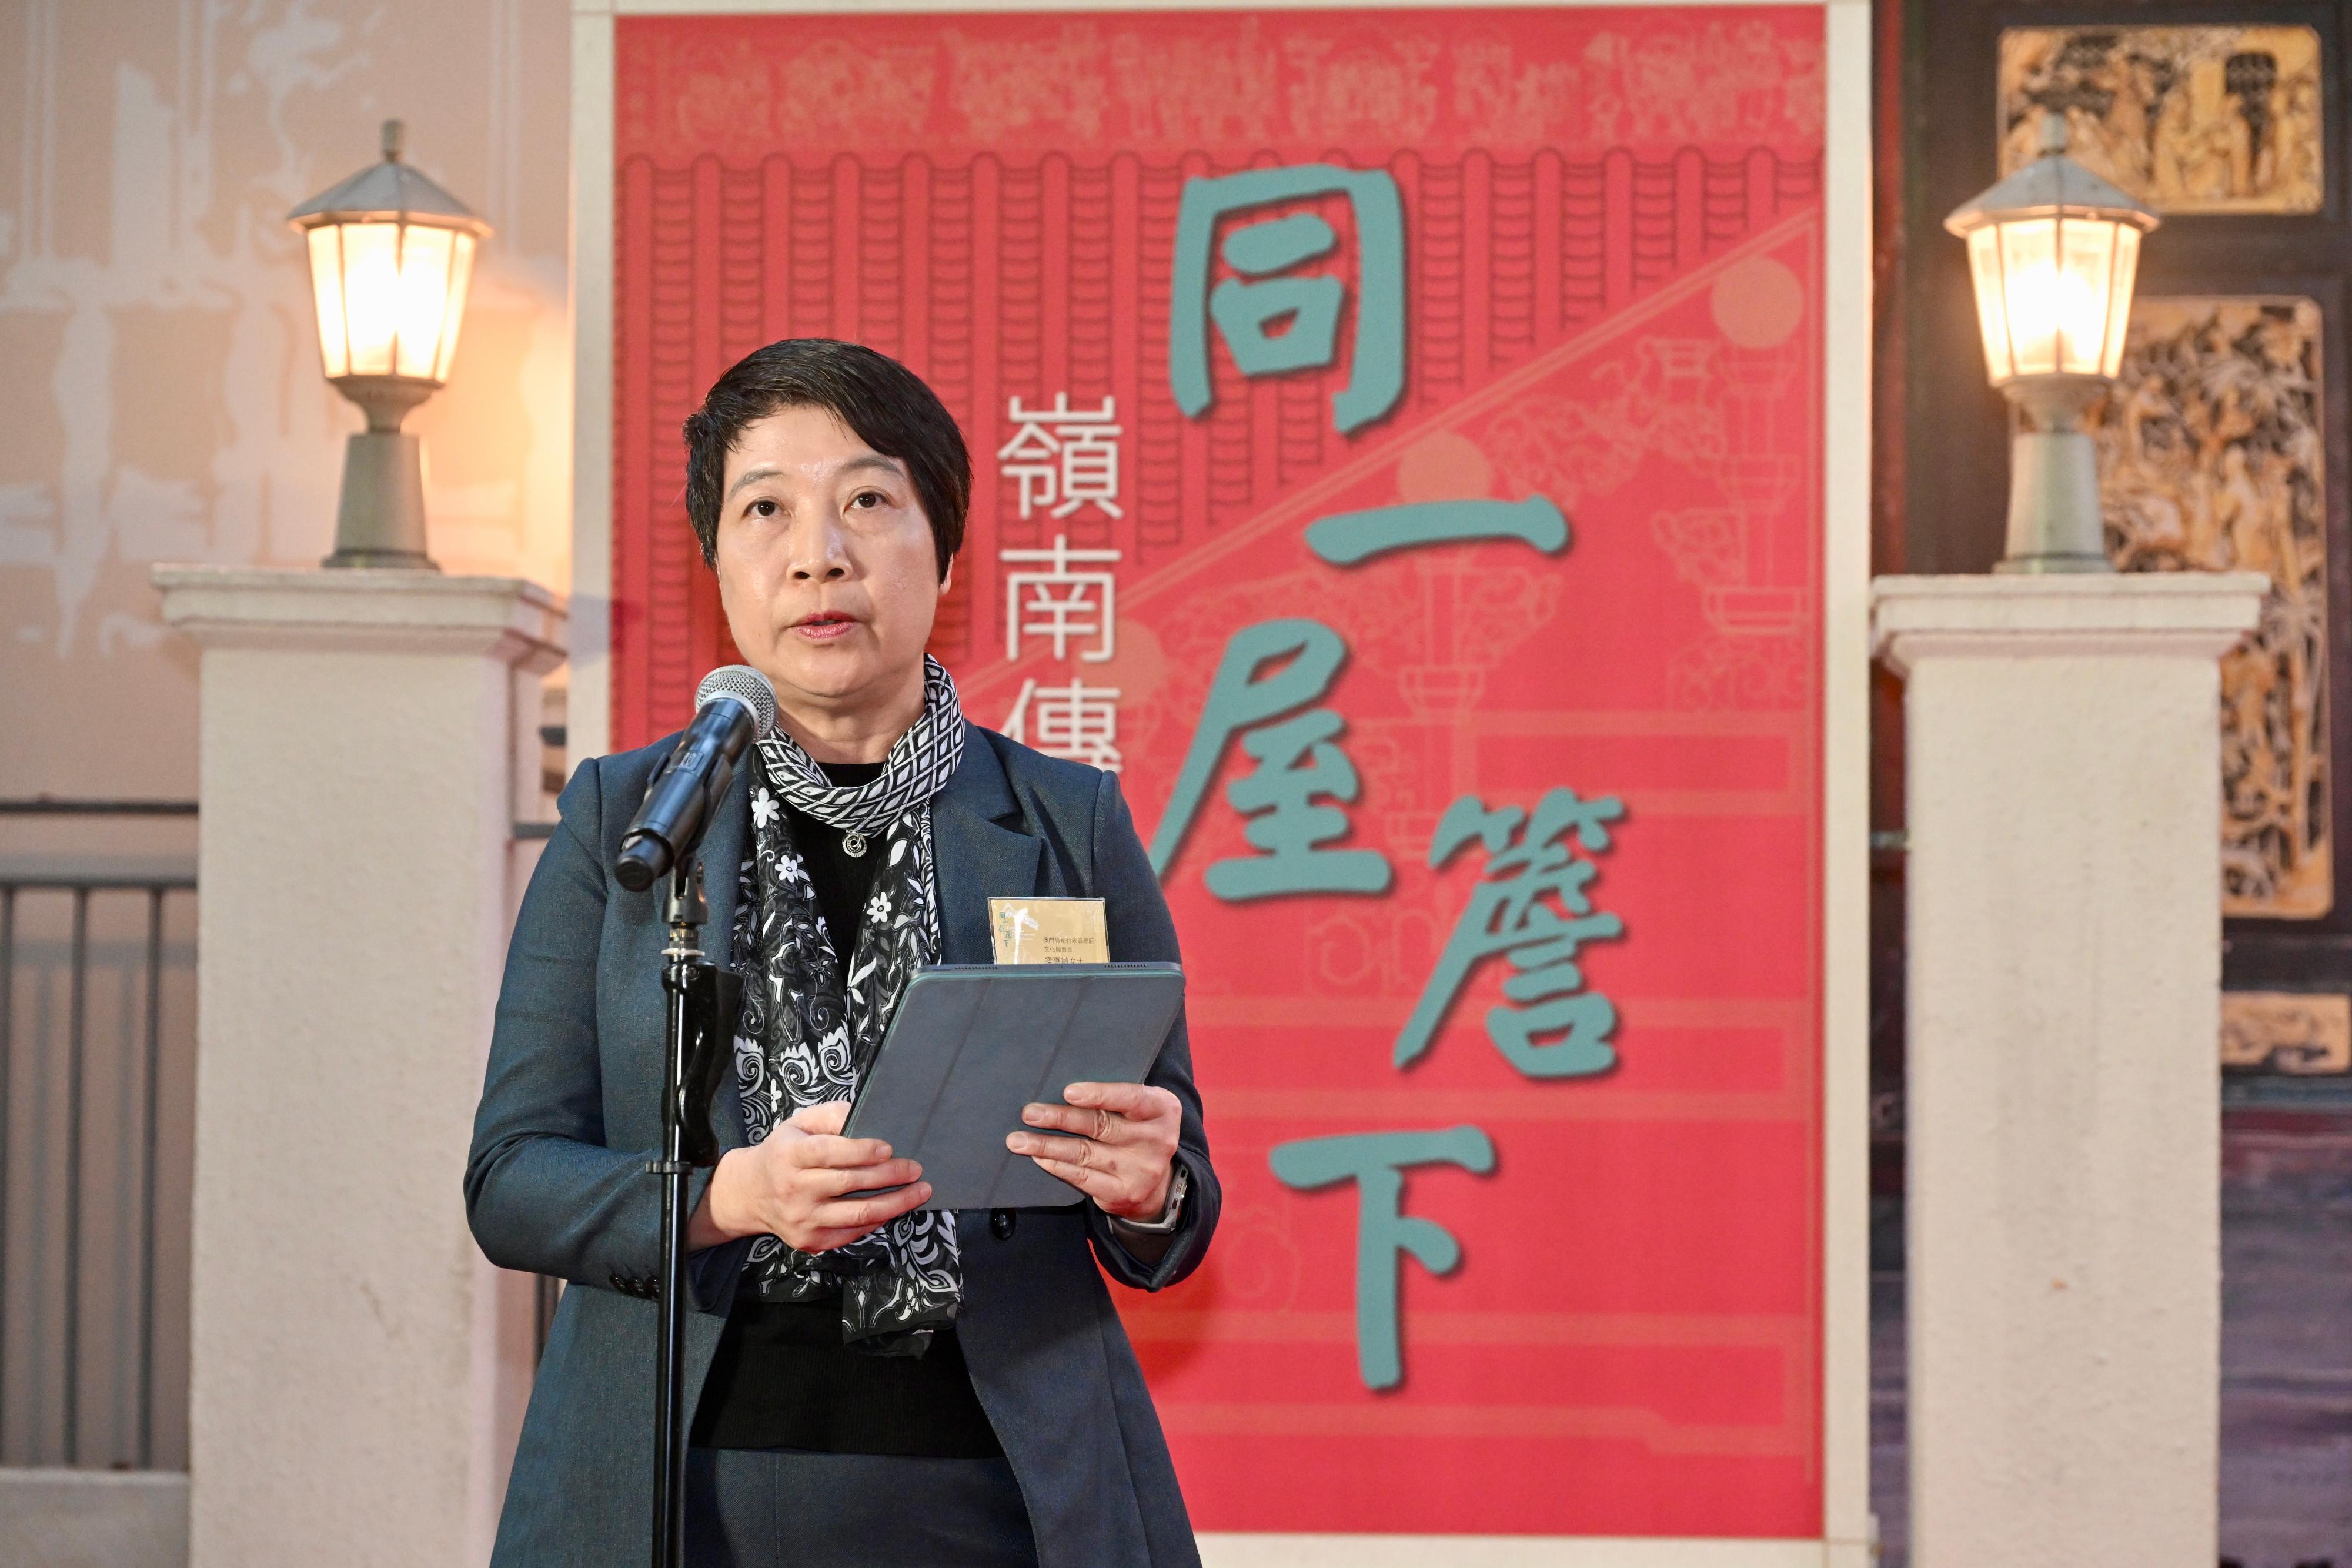 The "Under the Same Roof: Origin and Art of Lingnan Traditional Architecture" exhibition officially opened today (December 12). Photo shows the President of the Cultural Affairs Bureau of the Government of the Macao Special Administrative Region, Ms Leong Wai-man, giving a speech at the opening ceremony.